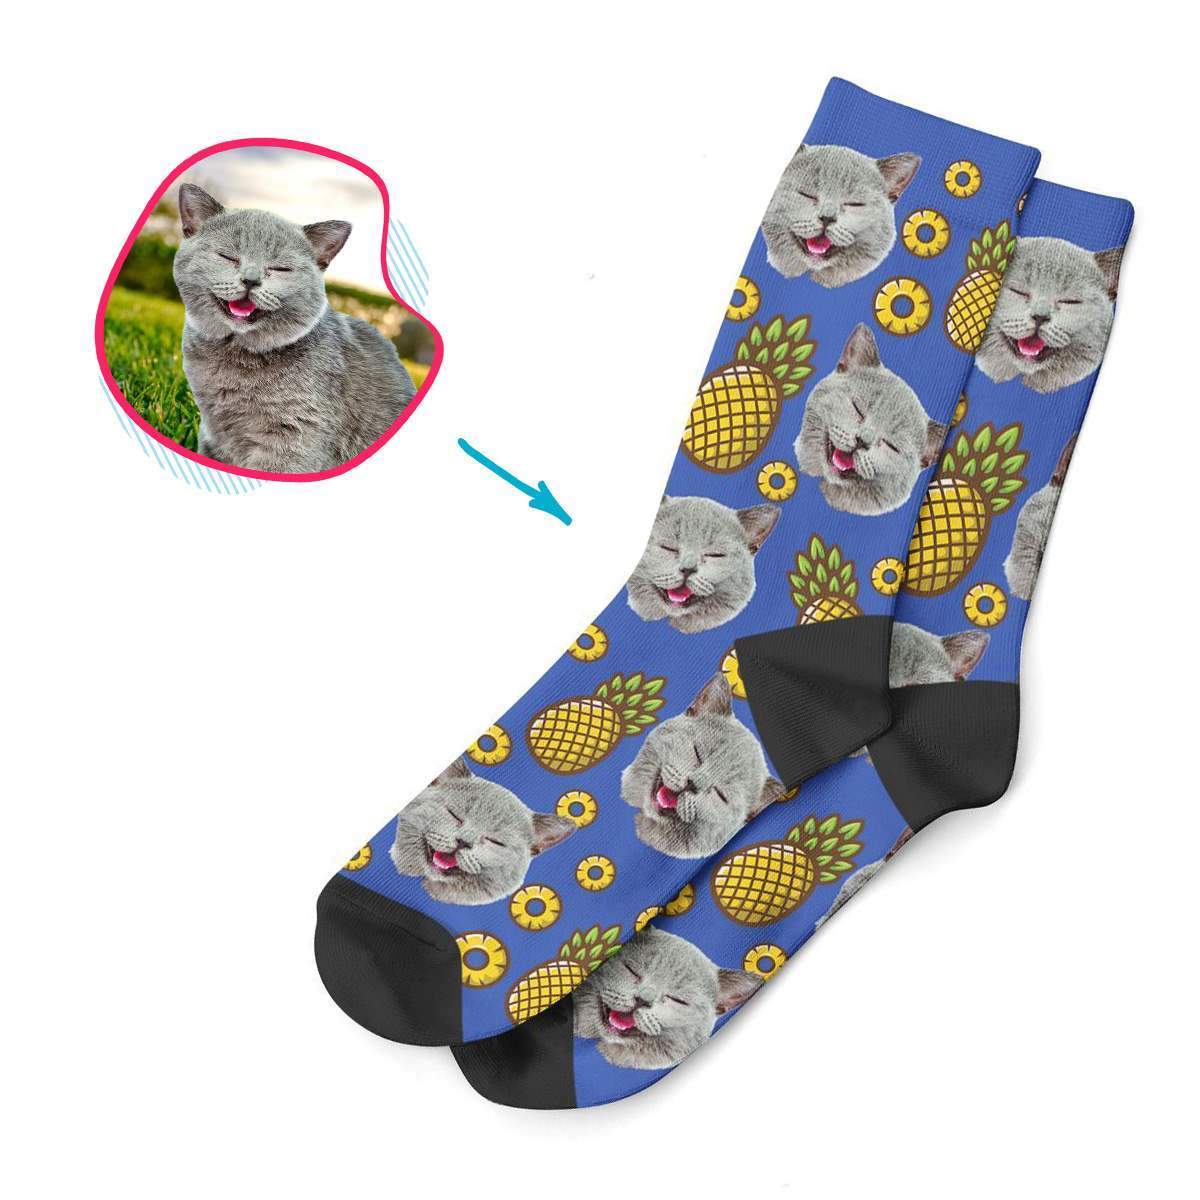 darkblue Fruits socks personalized with photo of face printed on them